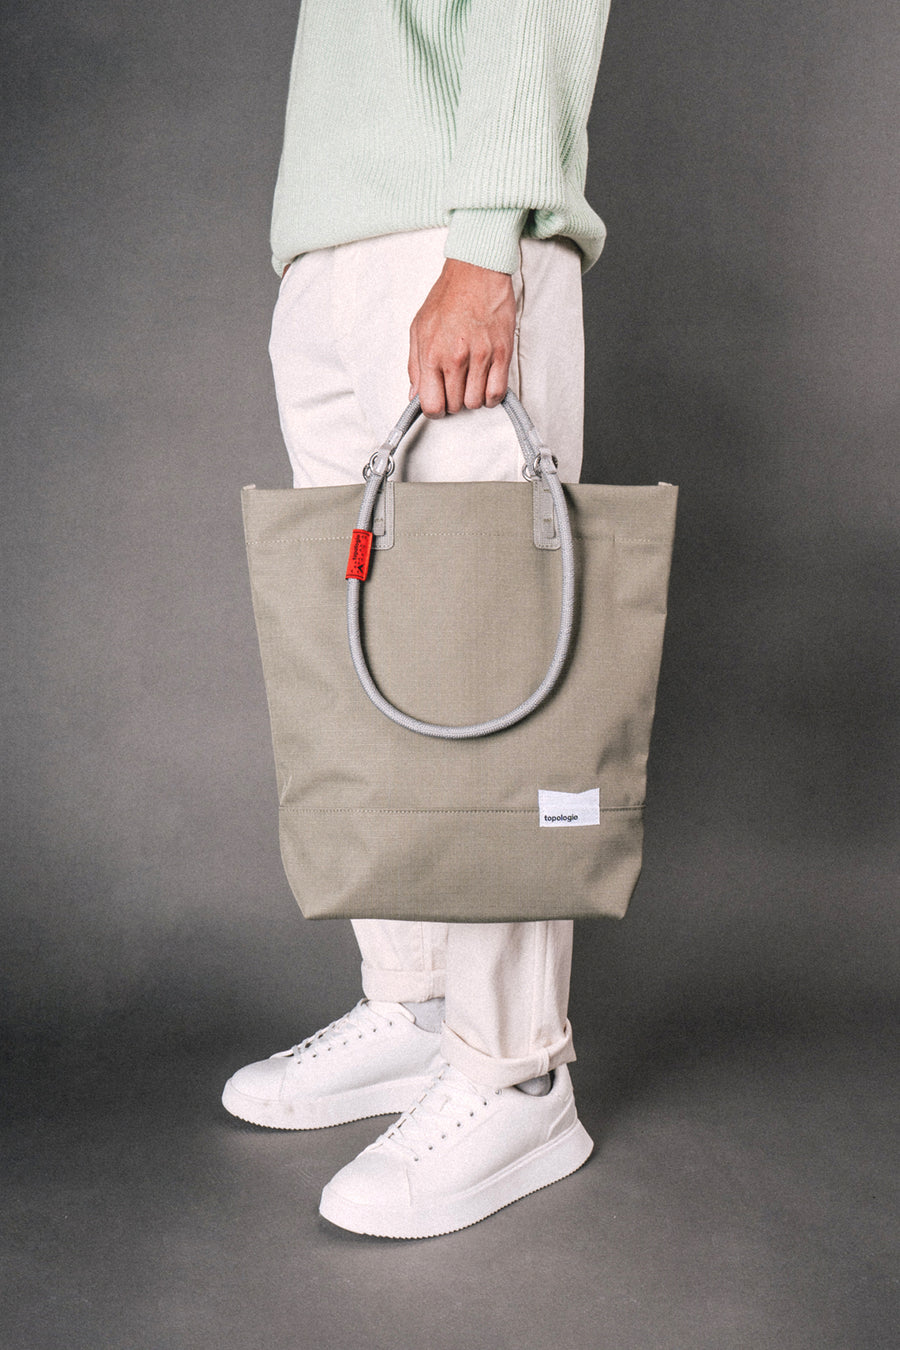 Loop Tote ループトート / Moss / 10mm Neon Yellow Solid